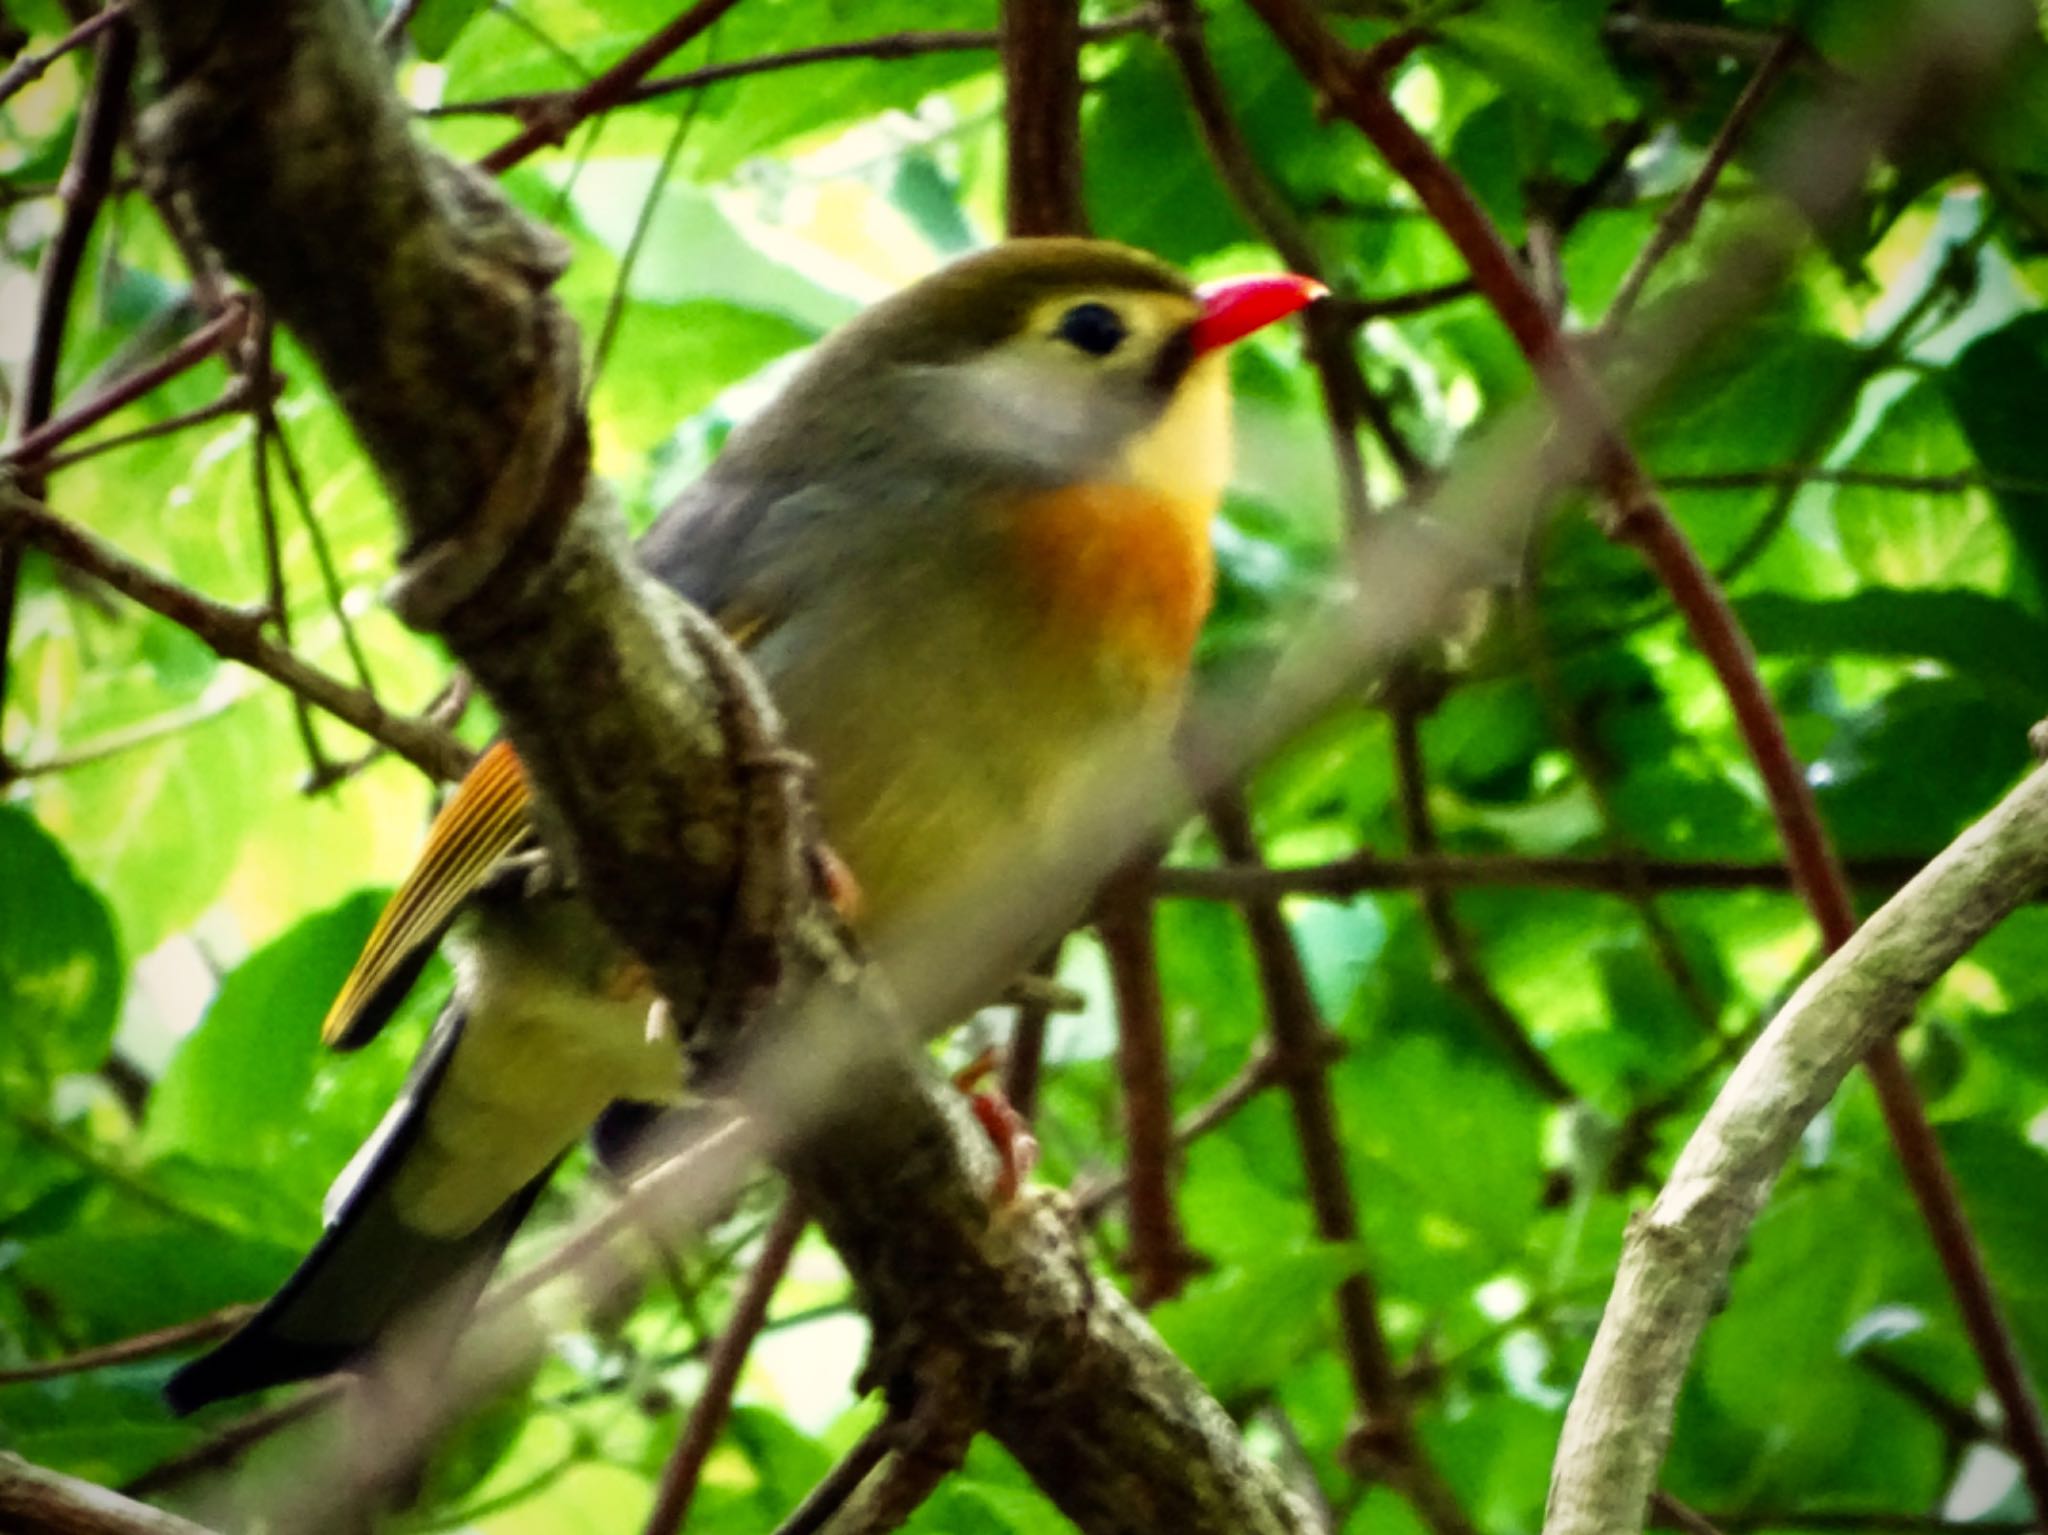 Photo of Red-billed Leiothrix at 瀬上市民の森 by KAWASEMIぴー